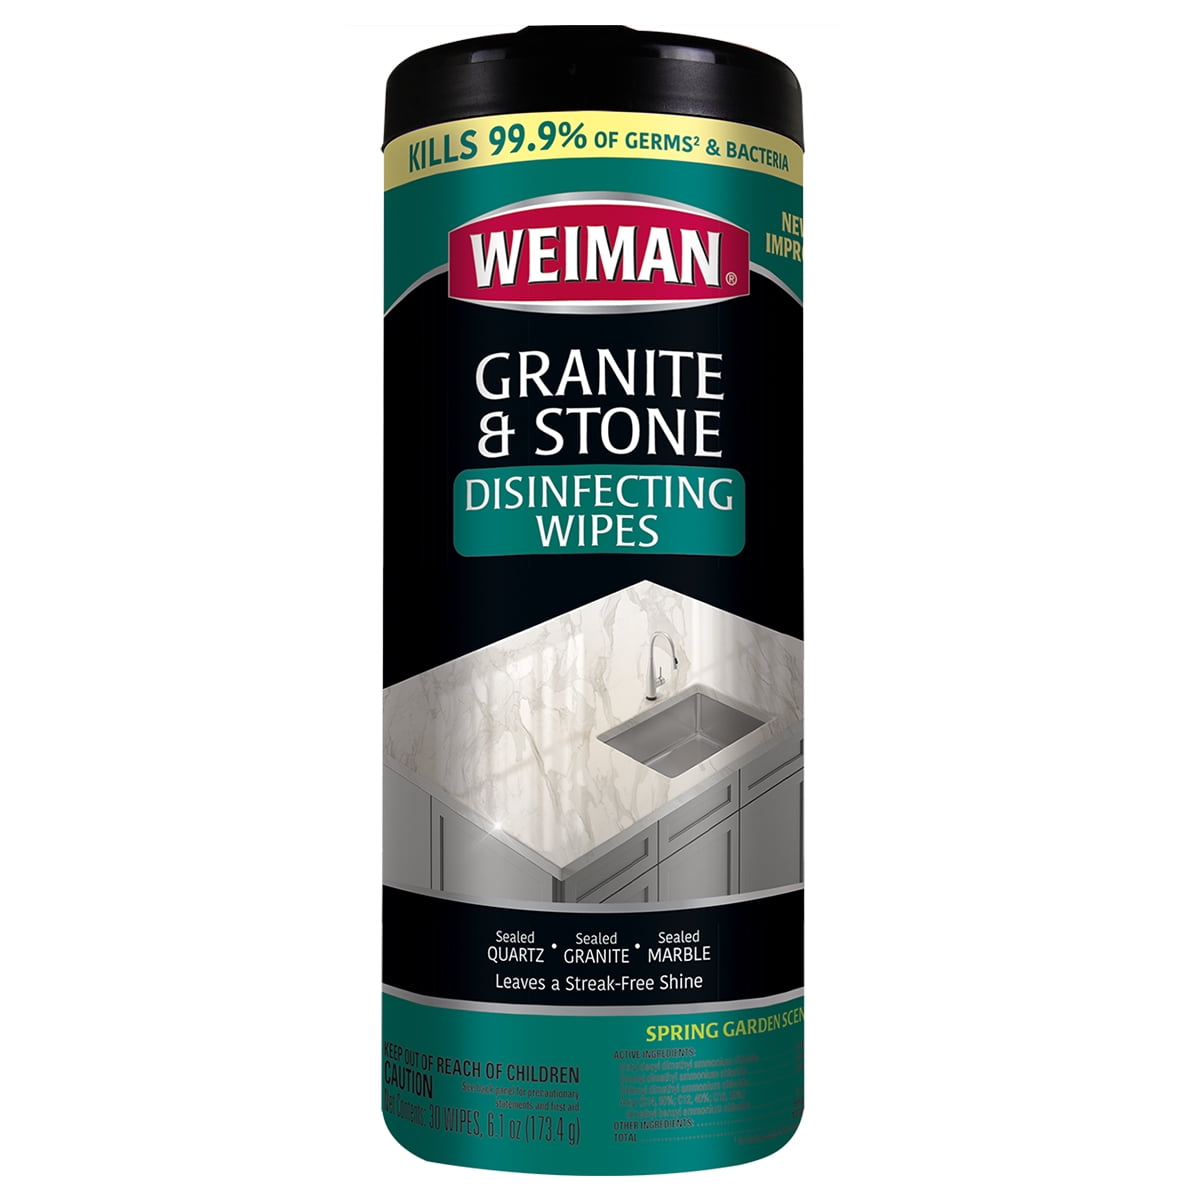 NEW Glass Steel & Granite Cleaning Wipes 80 Wipes Each 